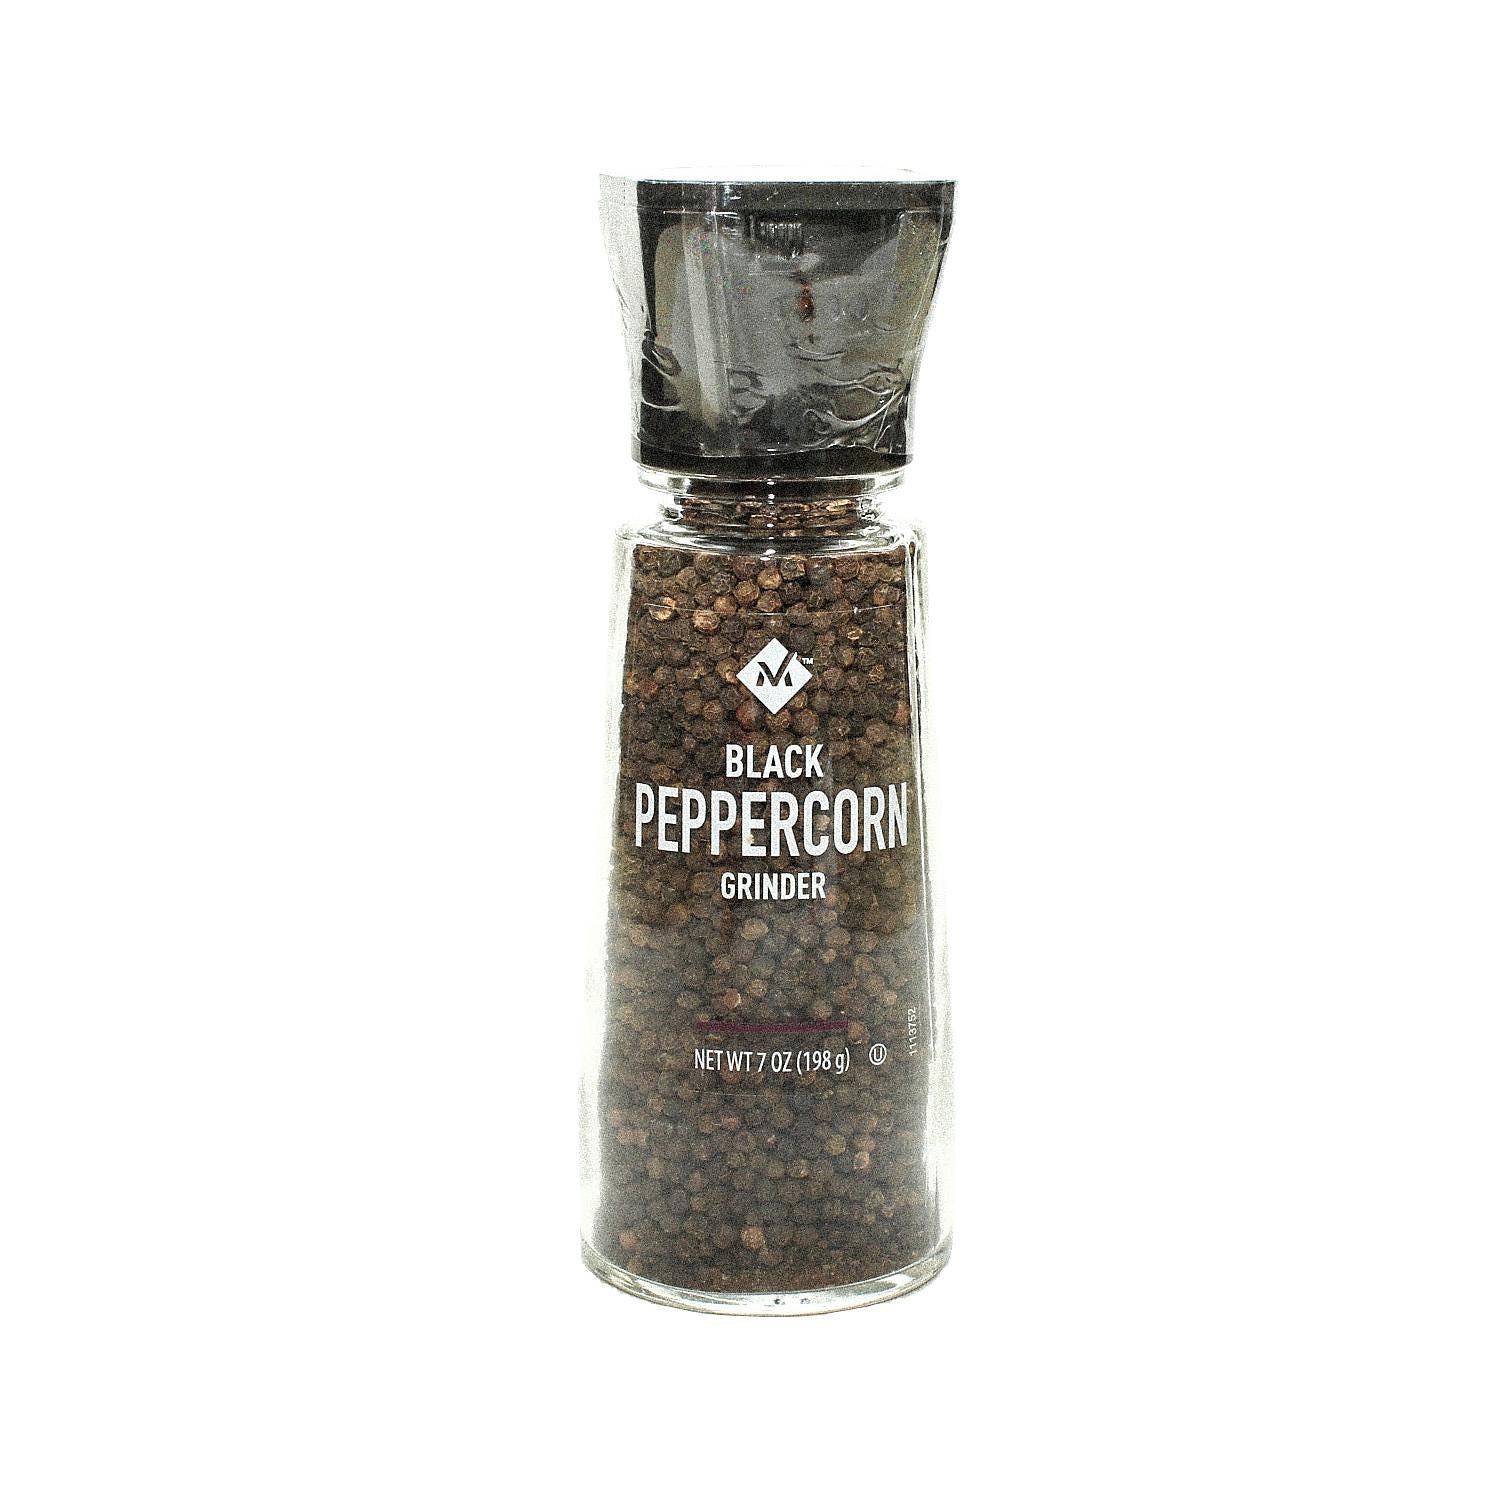 I Used This Pepper Grinder to Crack a Whole Bag of Peppercorns—and